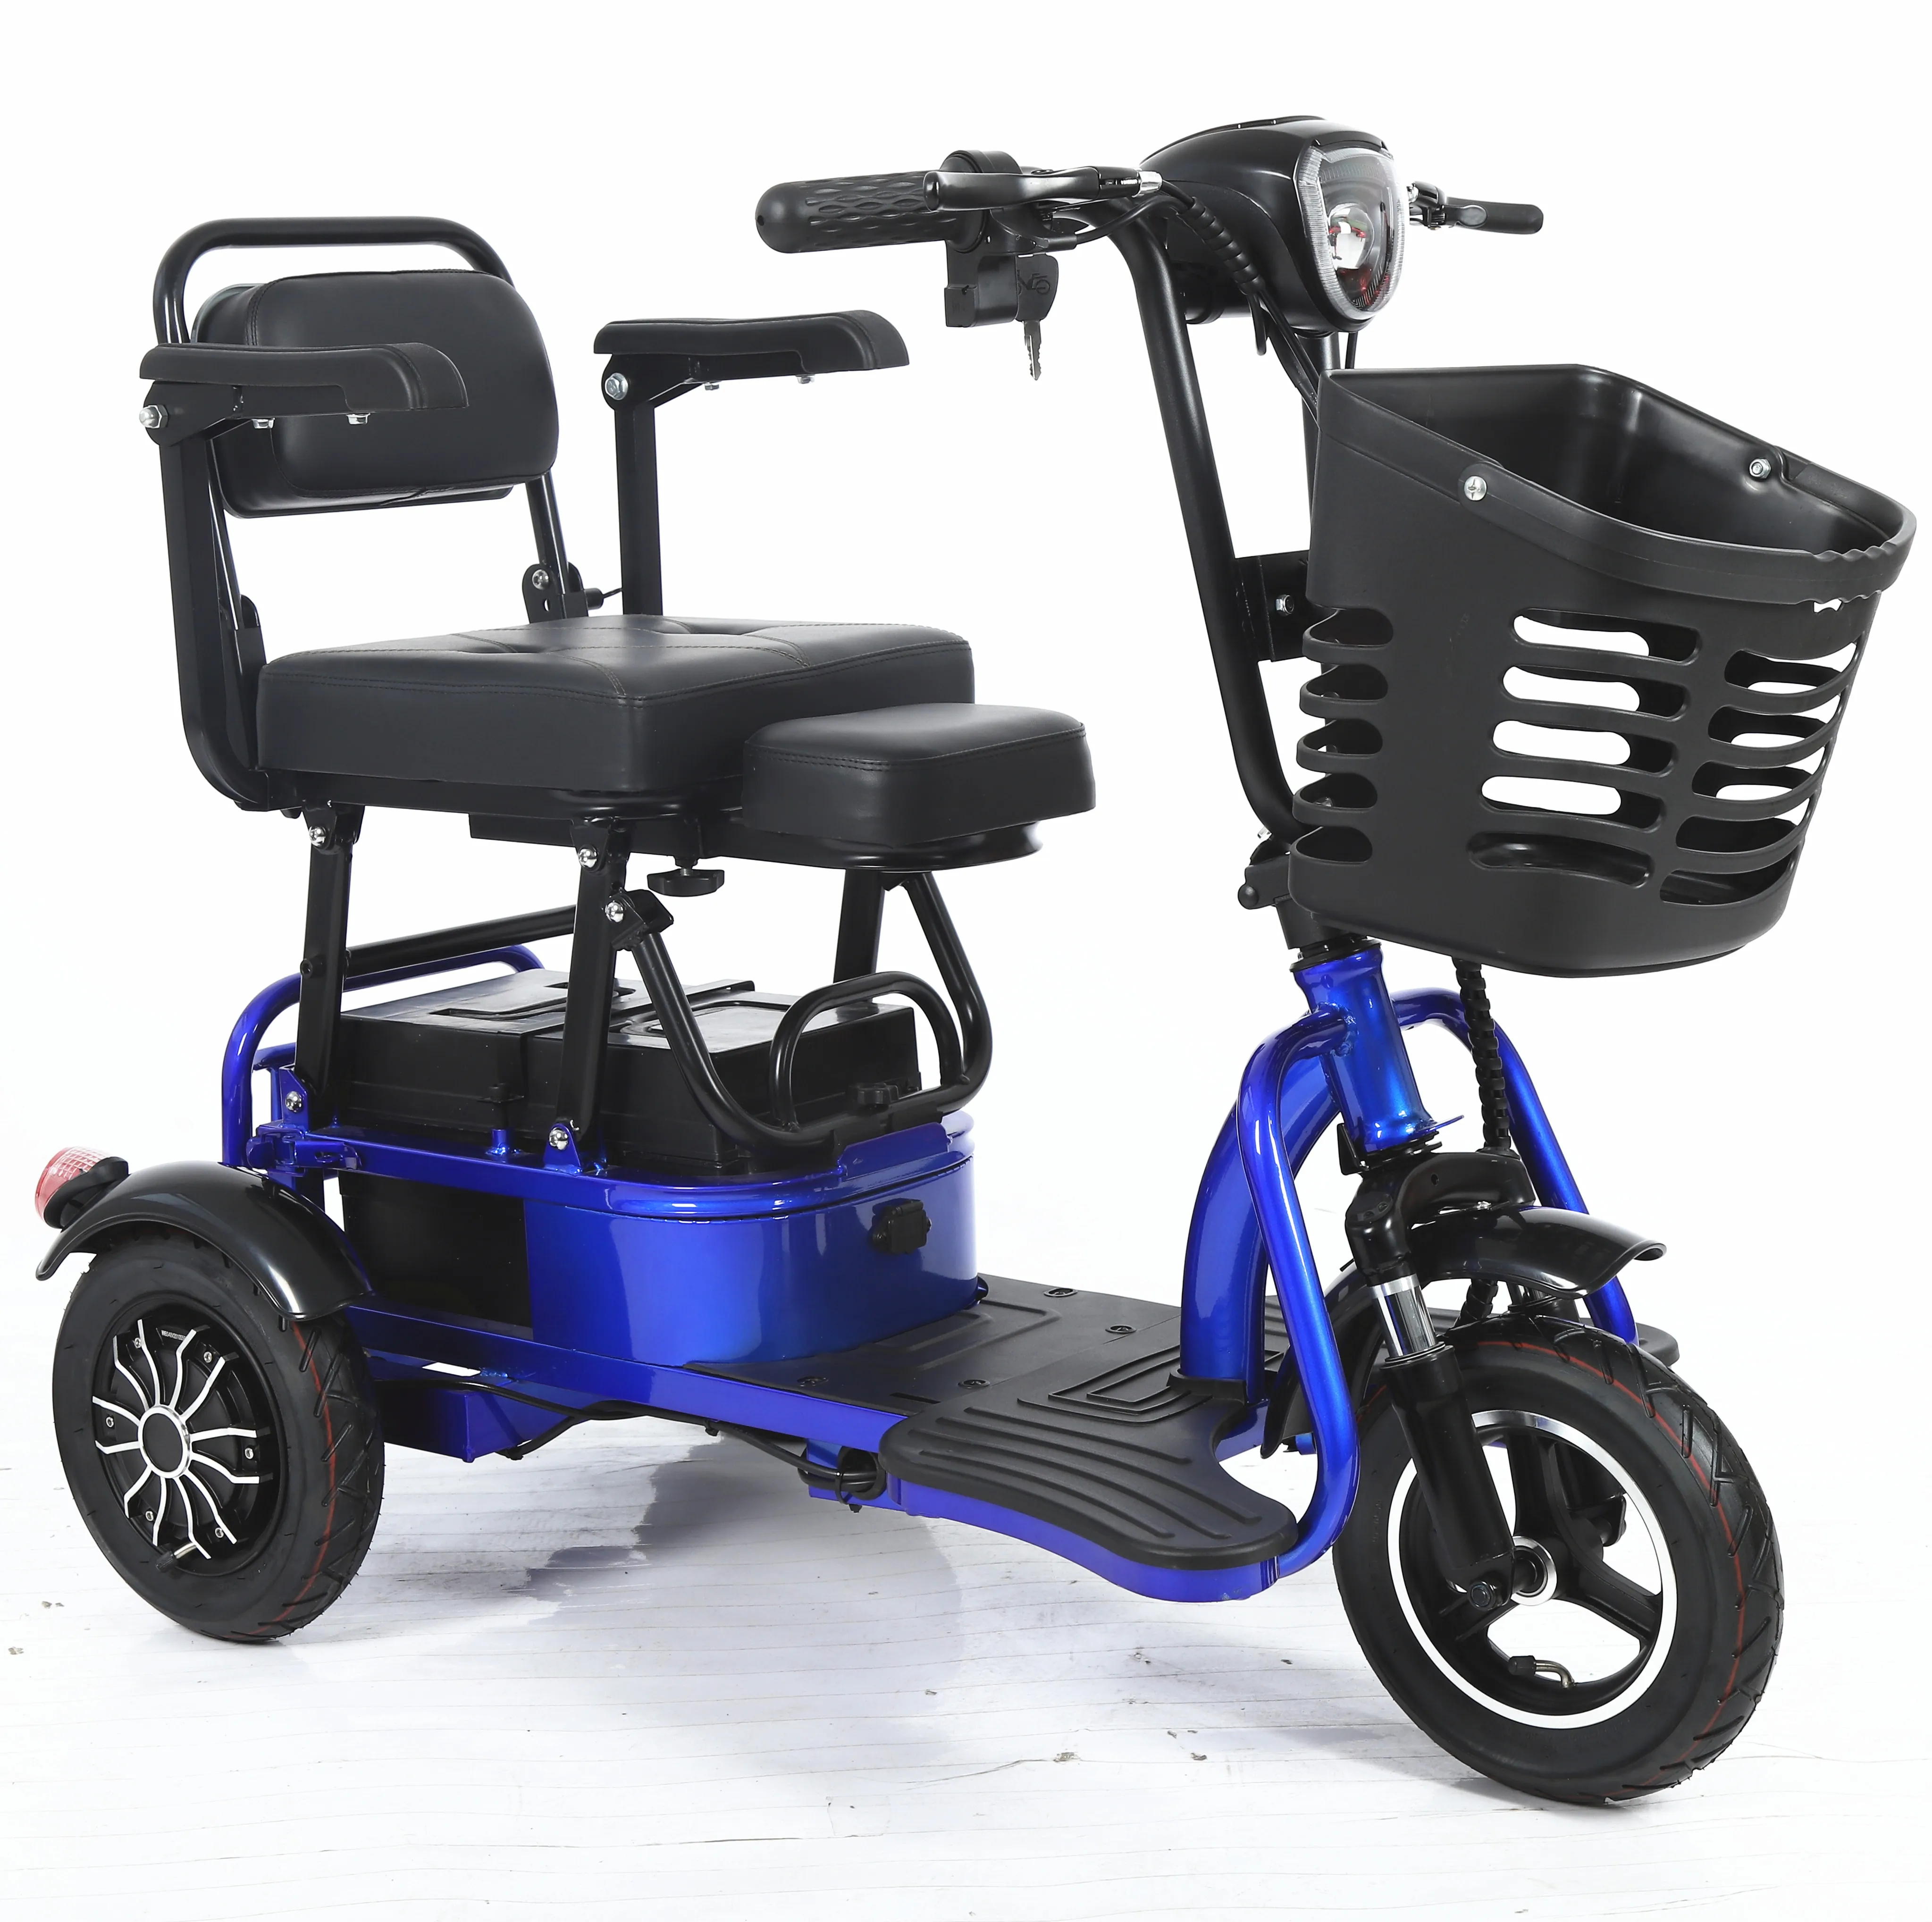 Hot sale three wheel electric tricycle scooter food delivery tailg 2021 cheap electric tricycle motorcycle